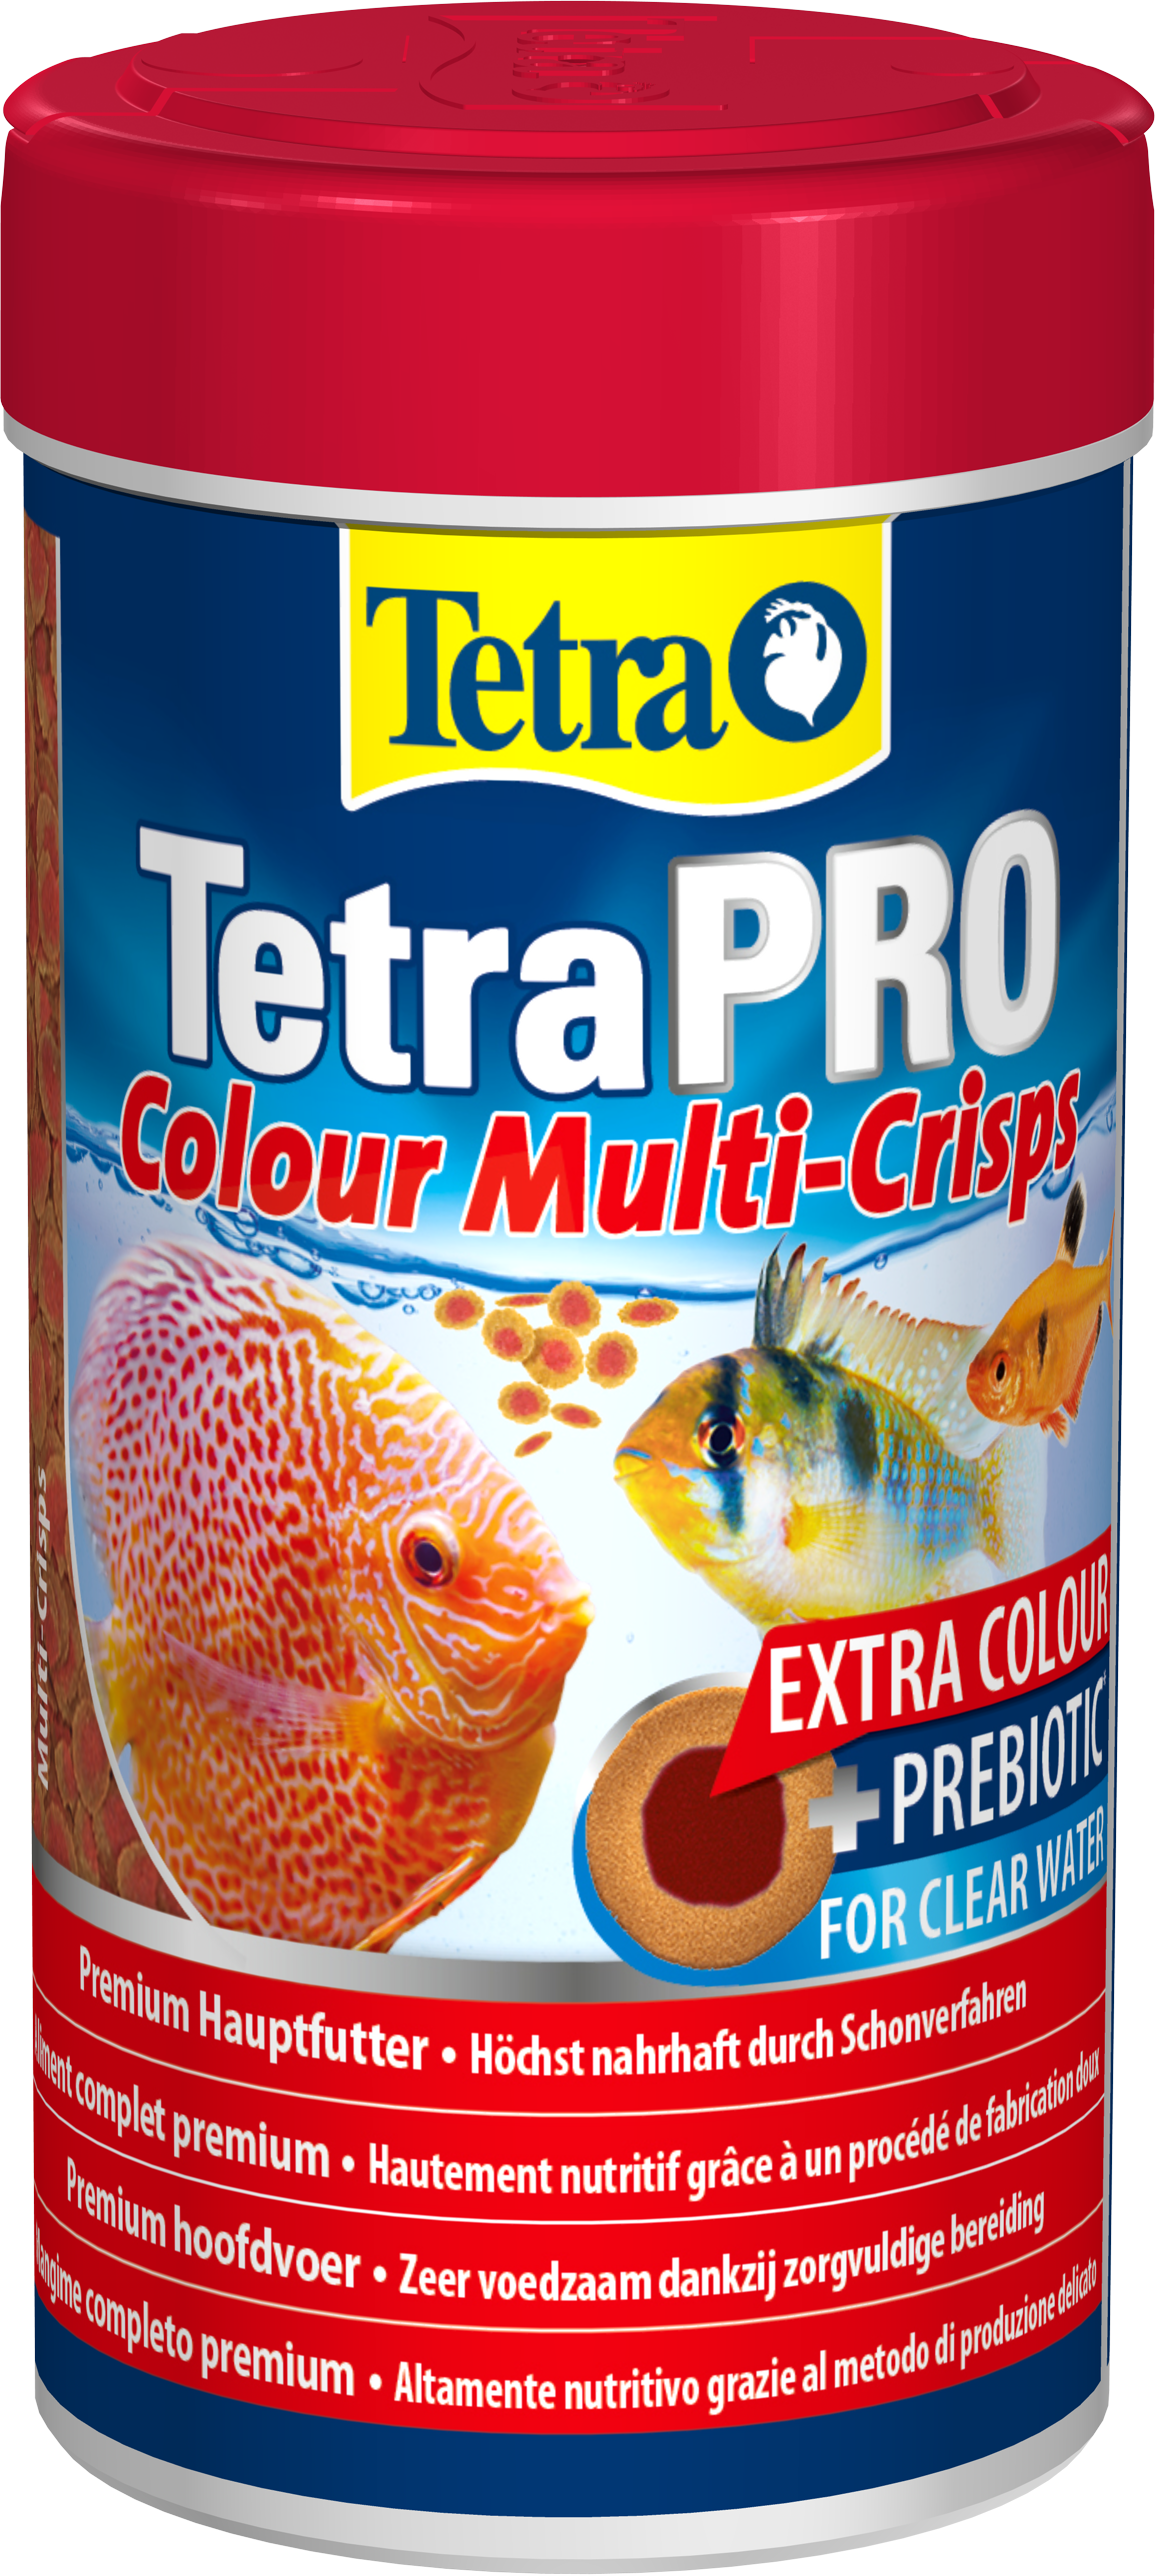 Tetra Feed Fodder For Fish Blowing Saturation Color, Chips Package 12gr. Tetra  Pro Color Crisps 149366, 0,012 Kg, 45030 - Fish Food - AliExpress